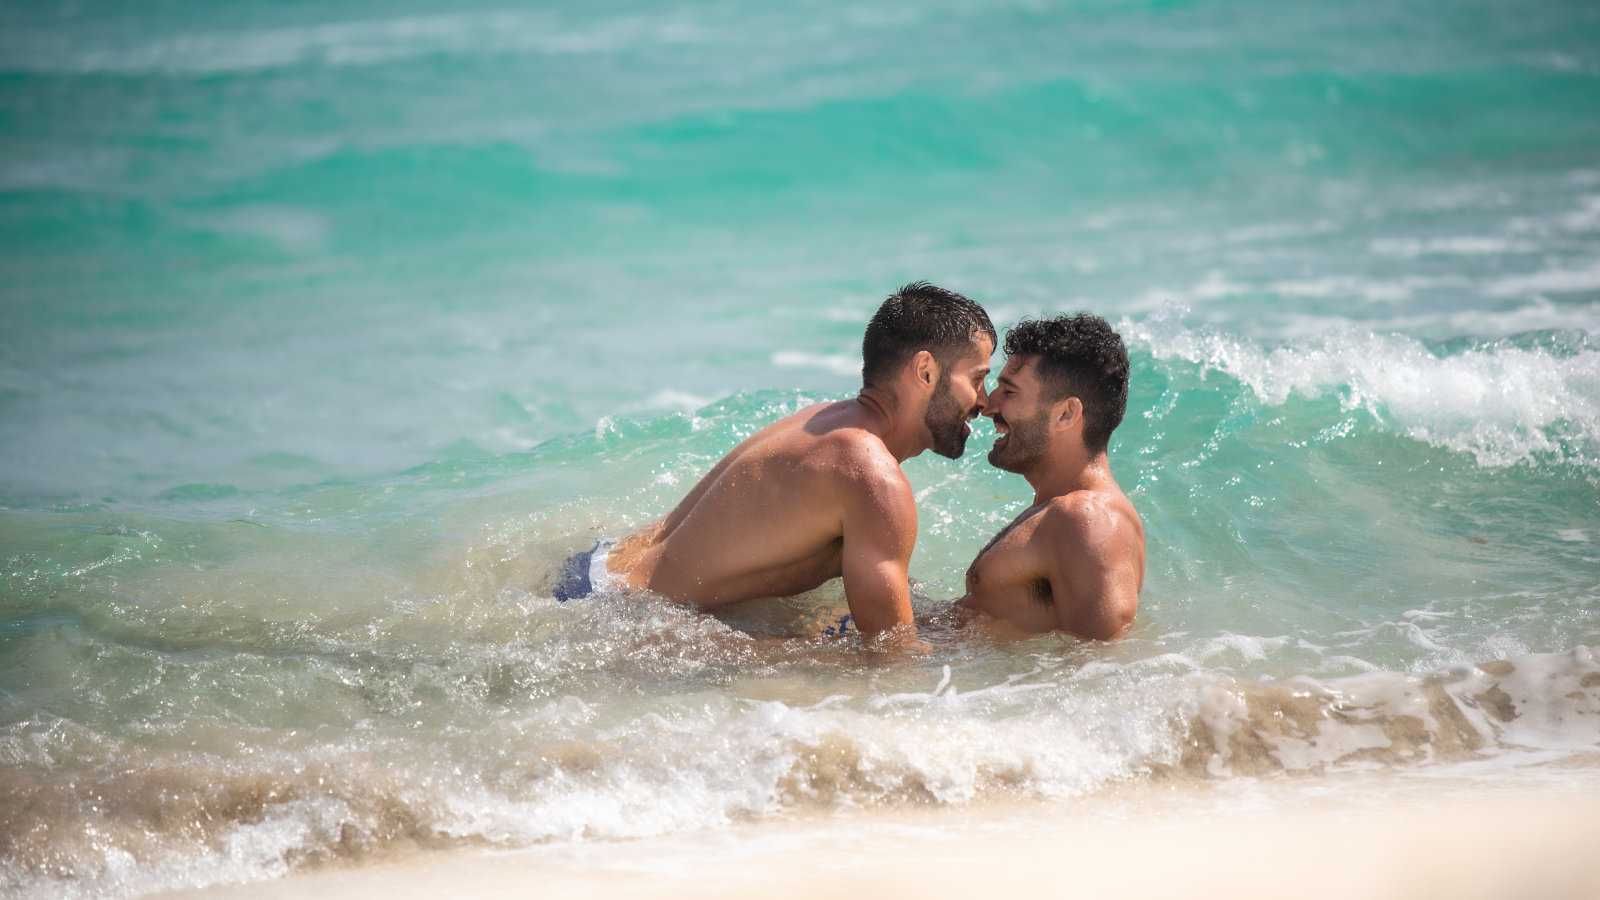 Beach 19 is the main gay beach in Lisbon and one of the best gay beaches in Europe